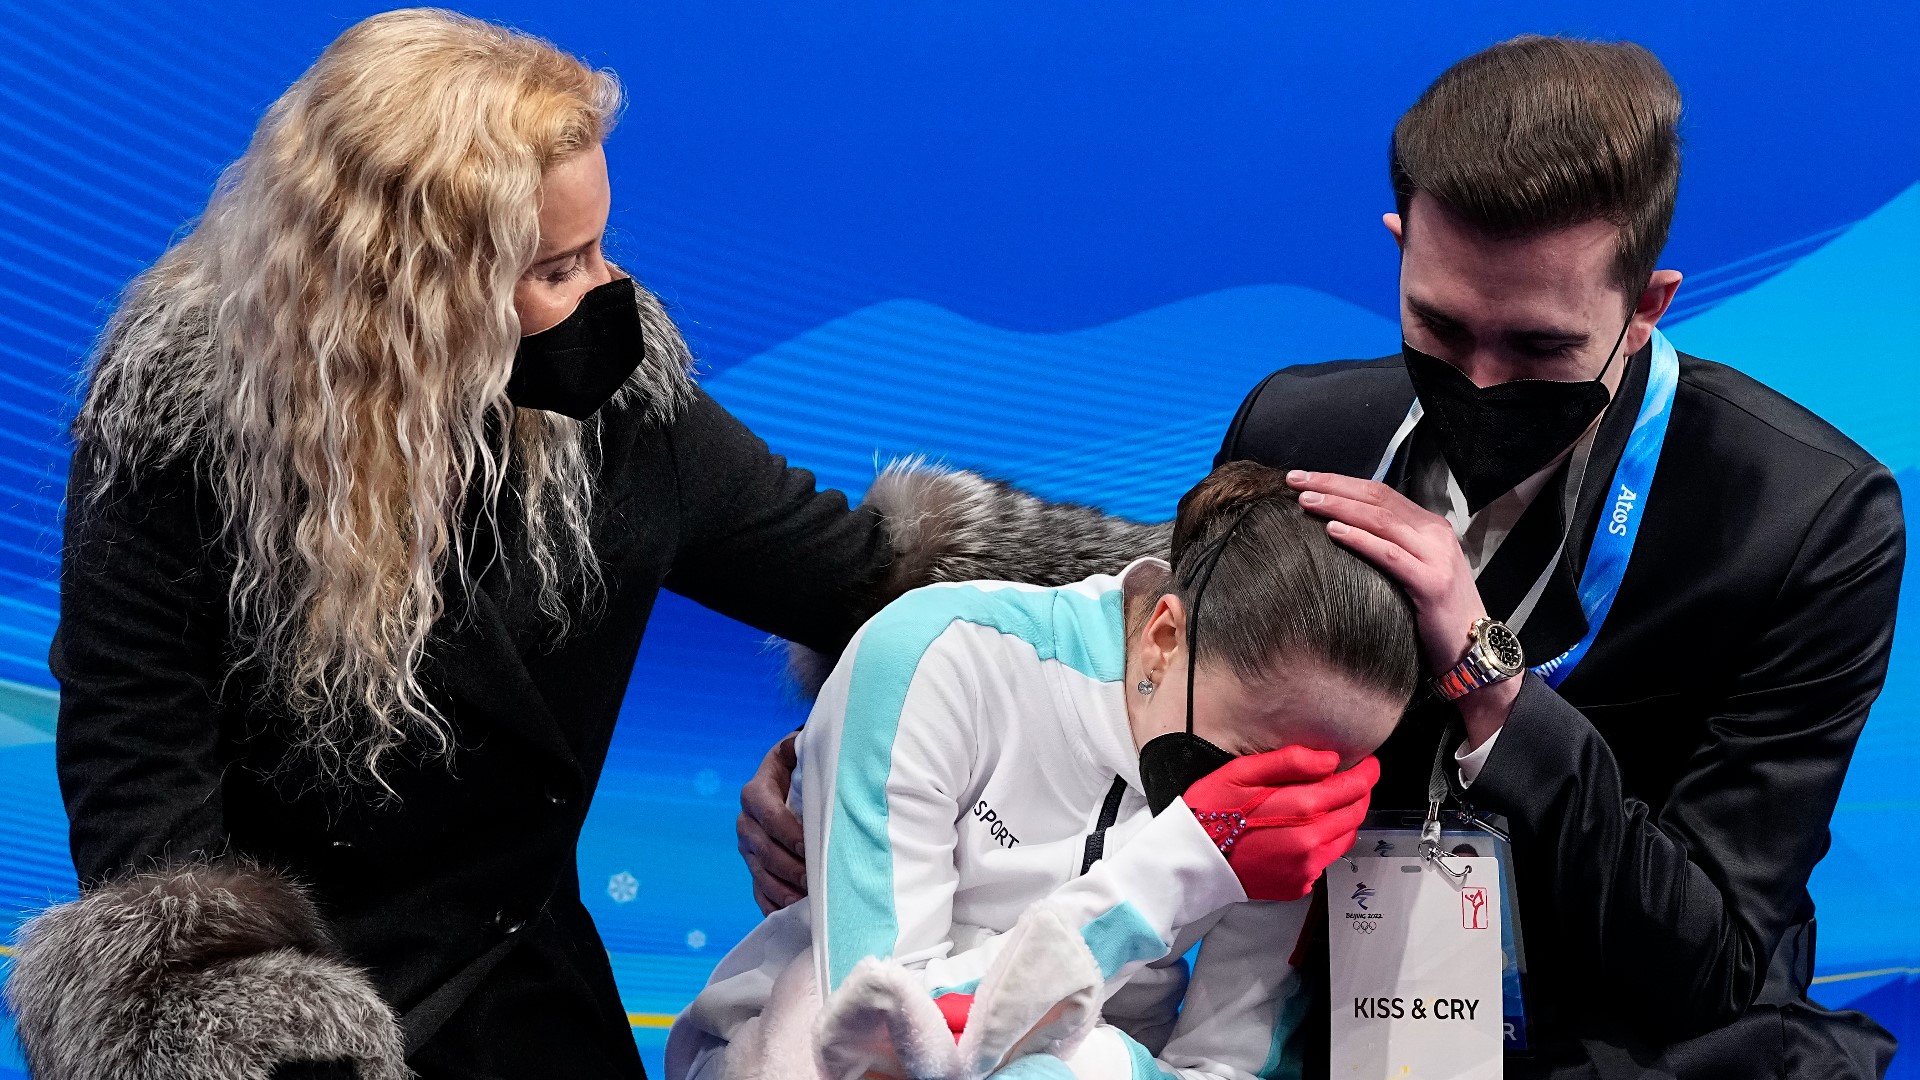 After Kamila Valieva's error-filled performance cost her a medal, the president of the IOC noted the "tremendous coldness" toward her by her team.